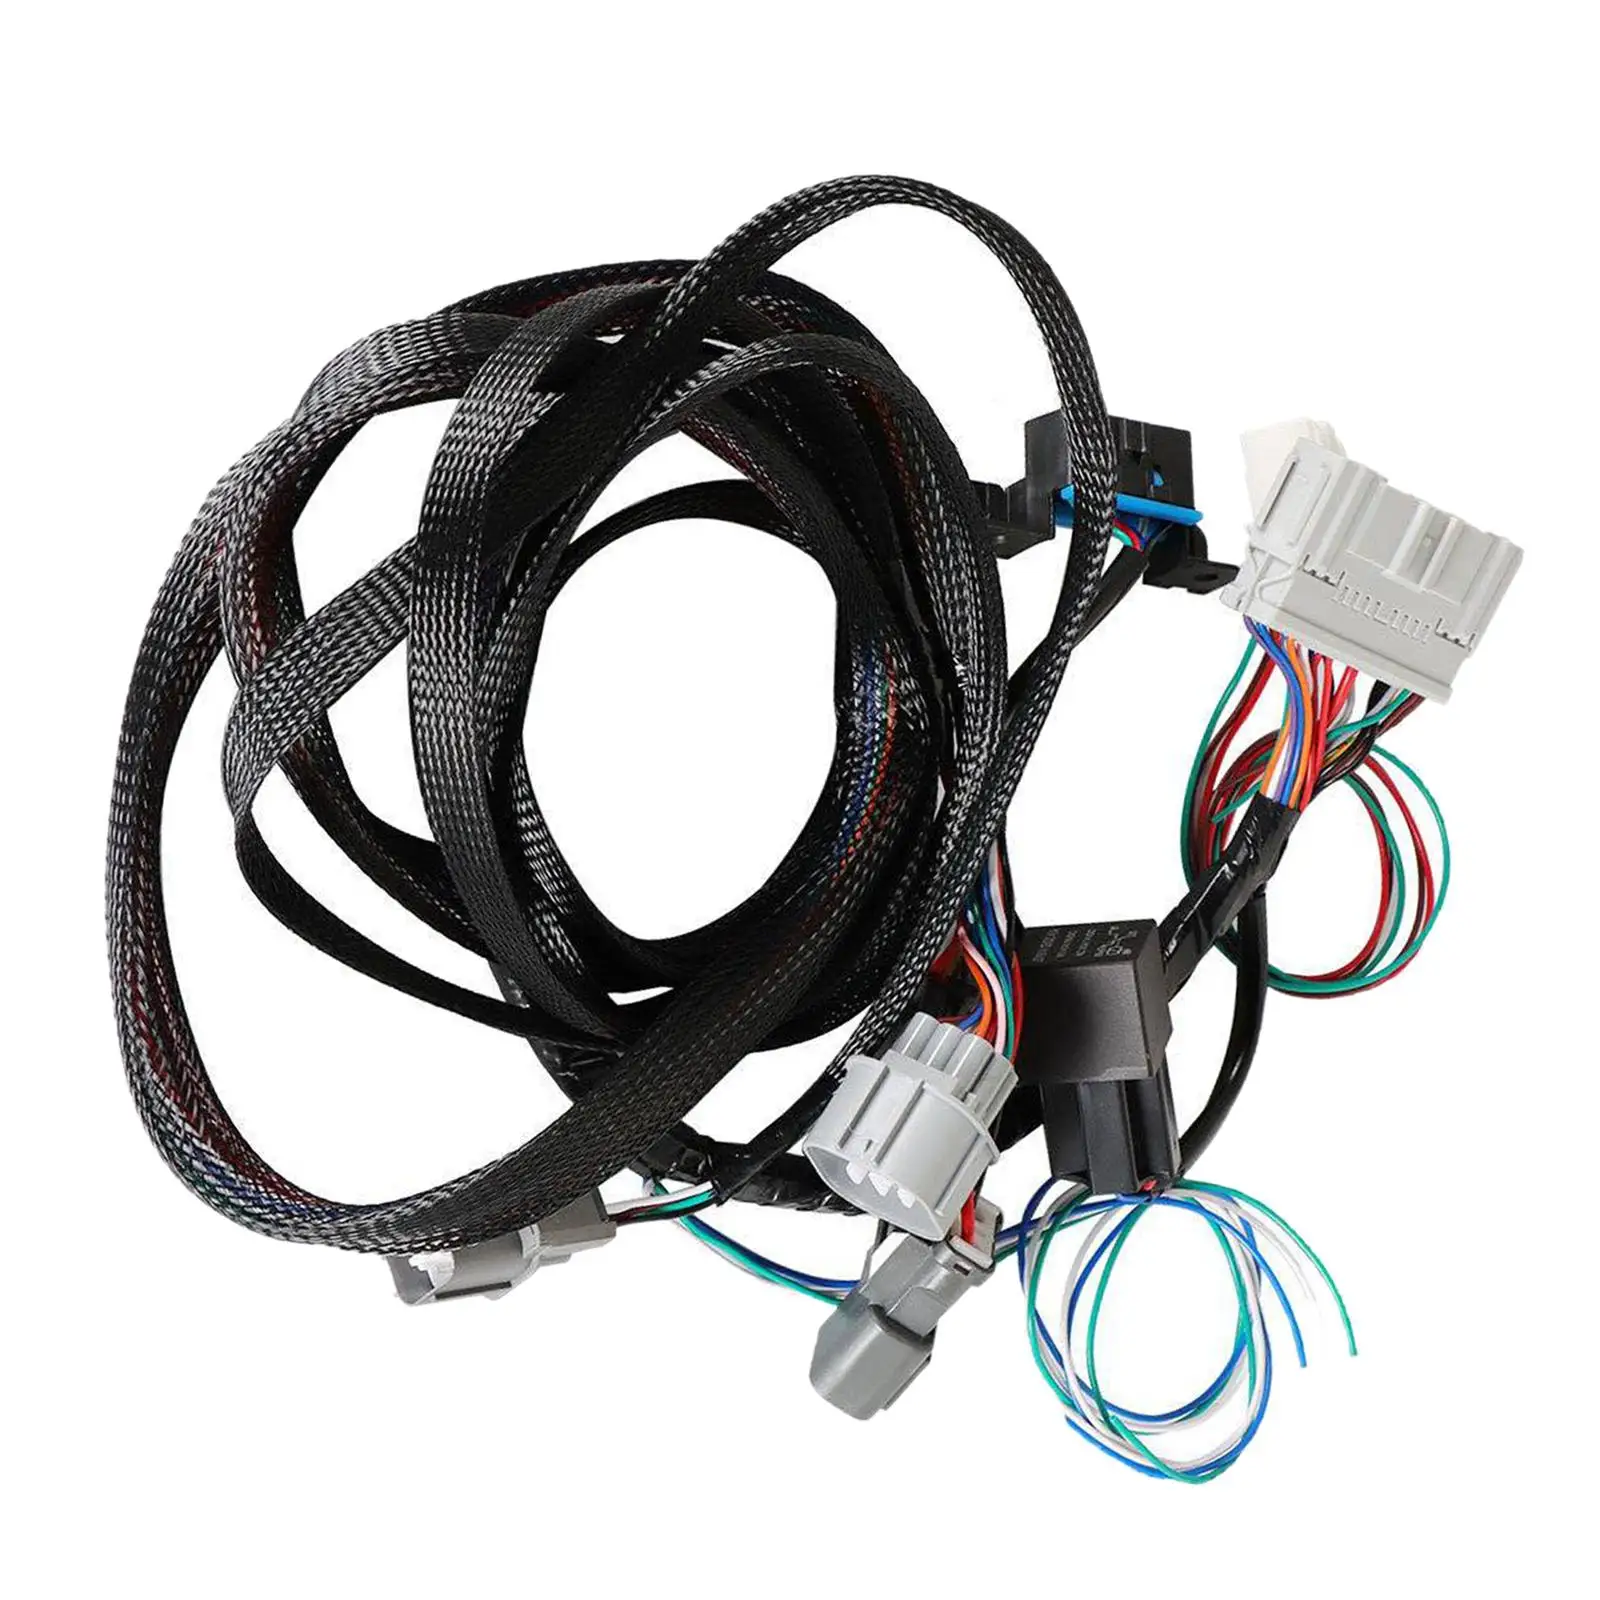 Sturdy Conversion Wire Harness Spare Parts Replacement DAC061 High Performance Vehicle for Integra with K Swap 1994-2001